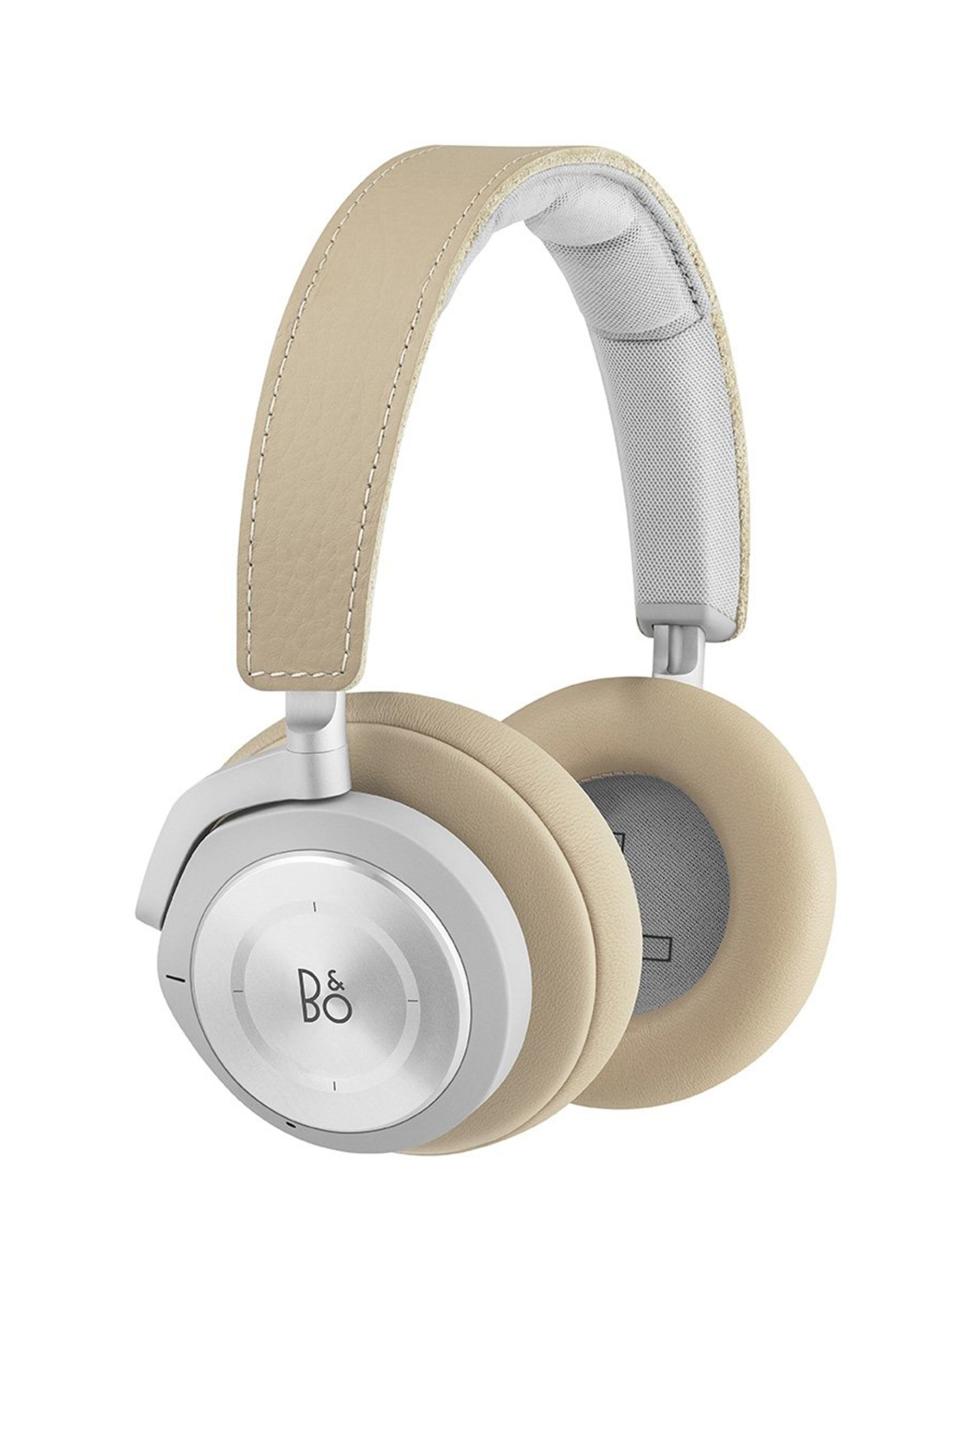 4) Beoplay H9i Wireless Bluetooth Over-Ear Headphones